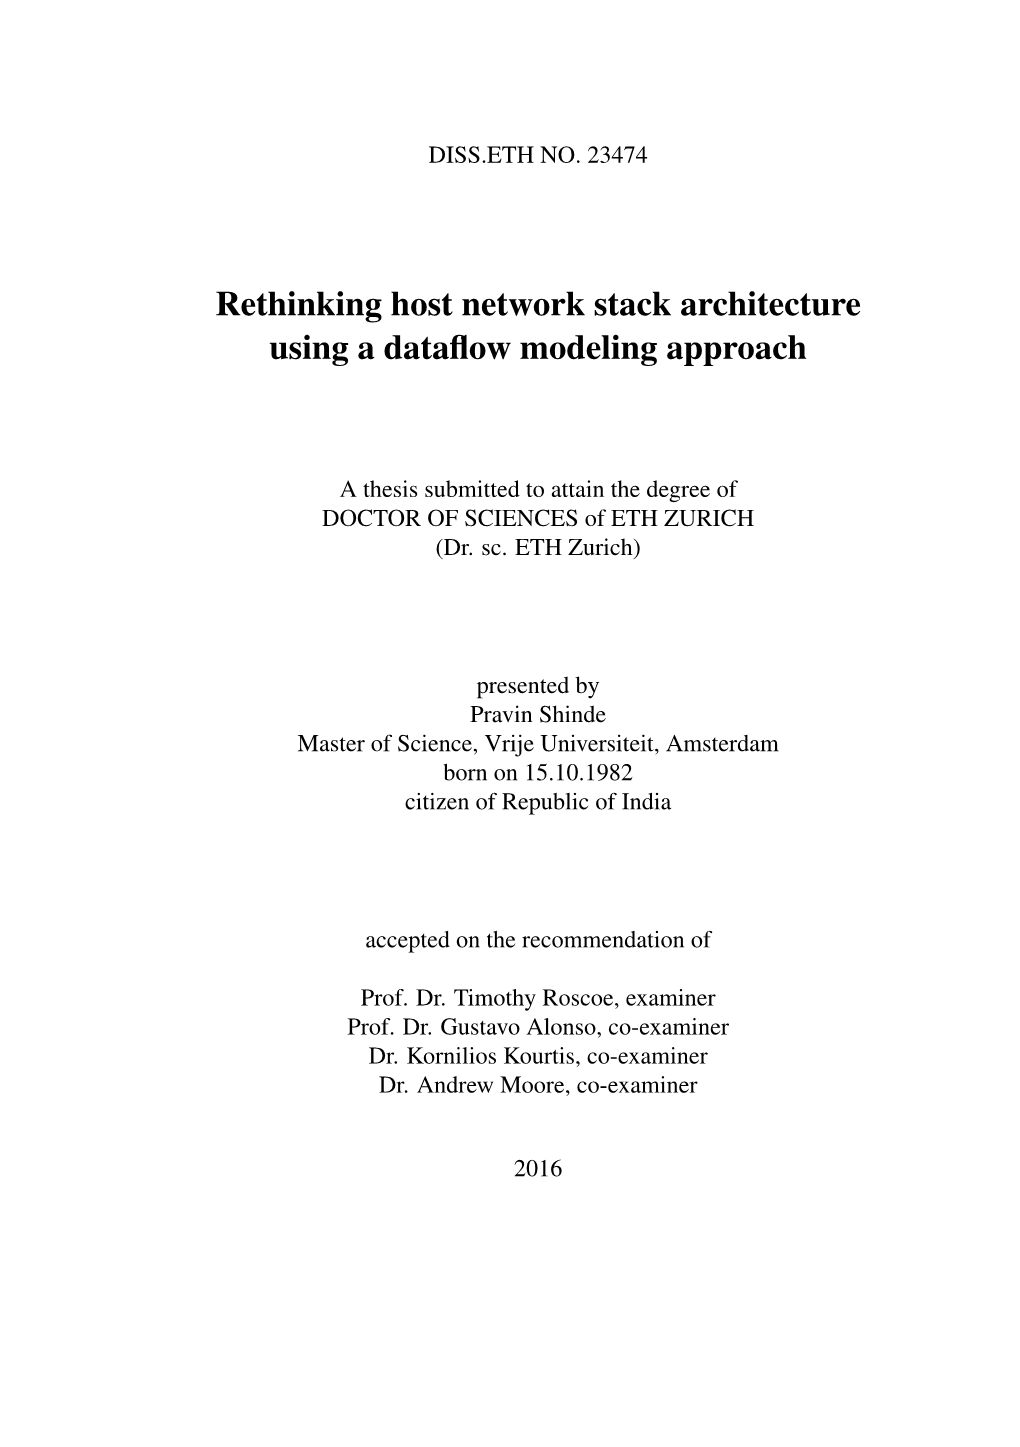 Rethinking Host Network Stack Architecture Using a Dataflow Modeling Approach